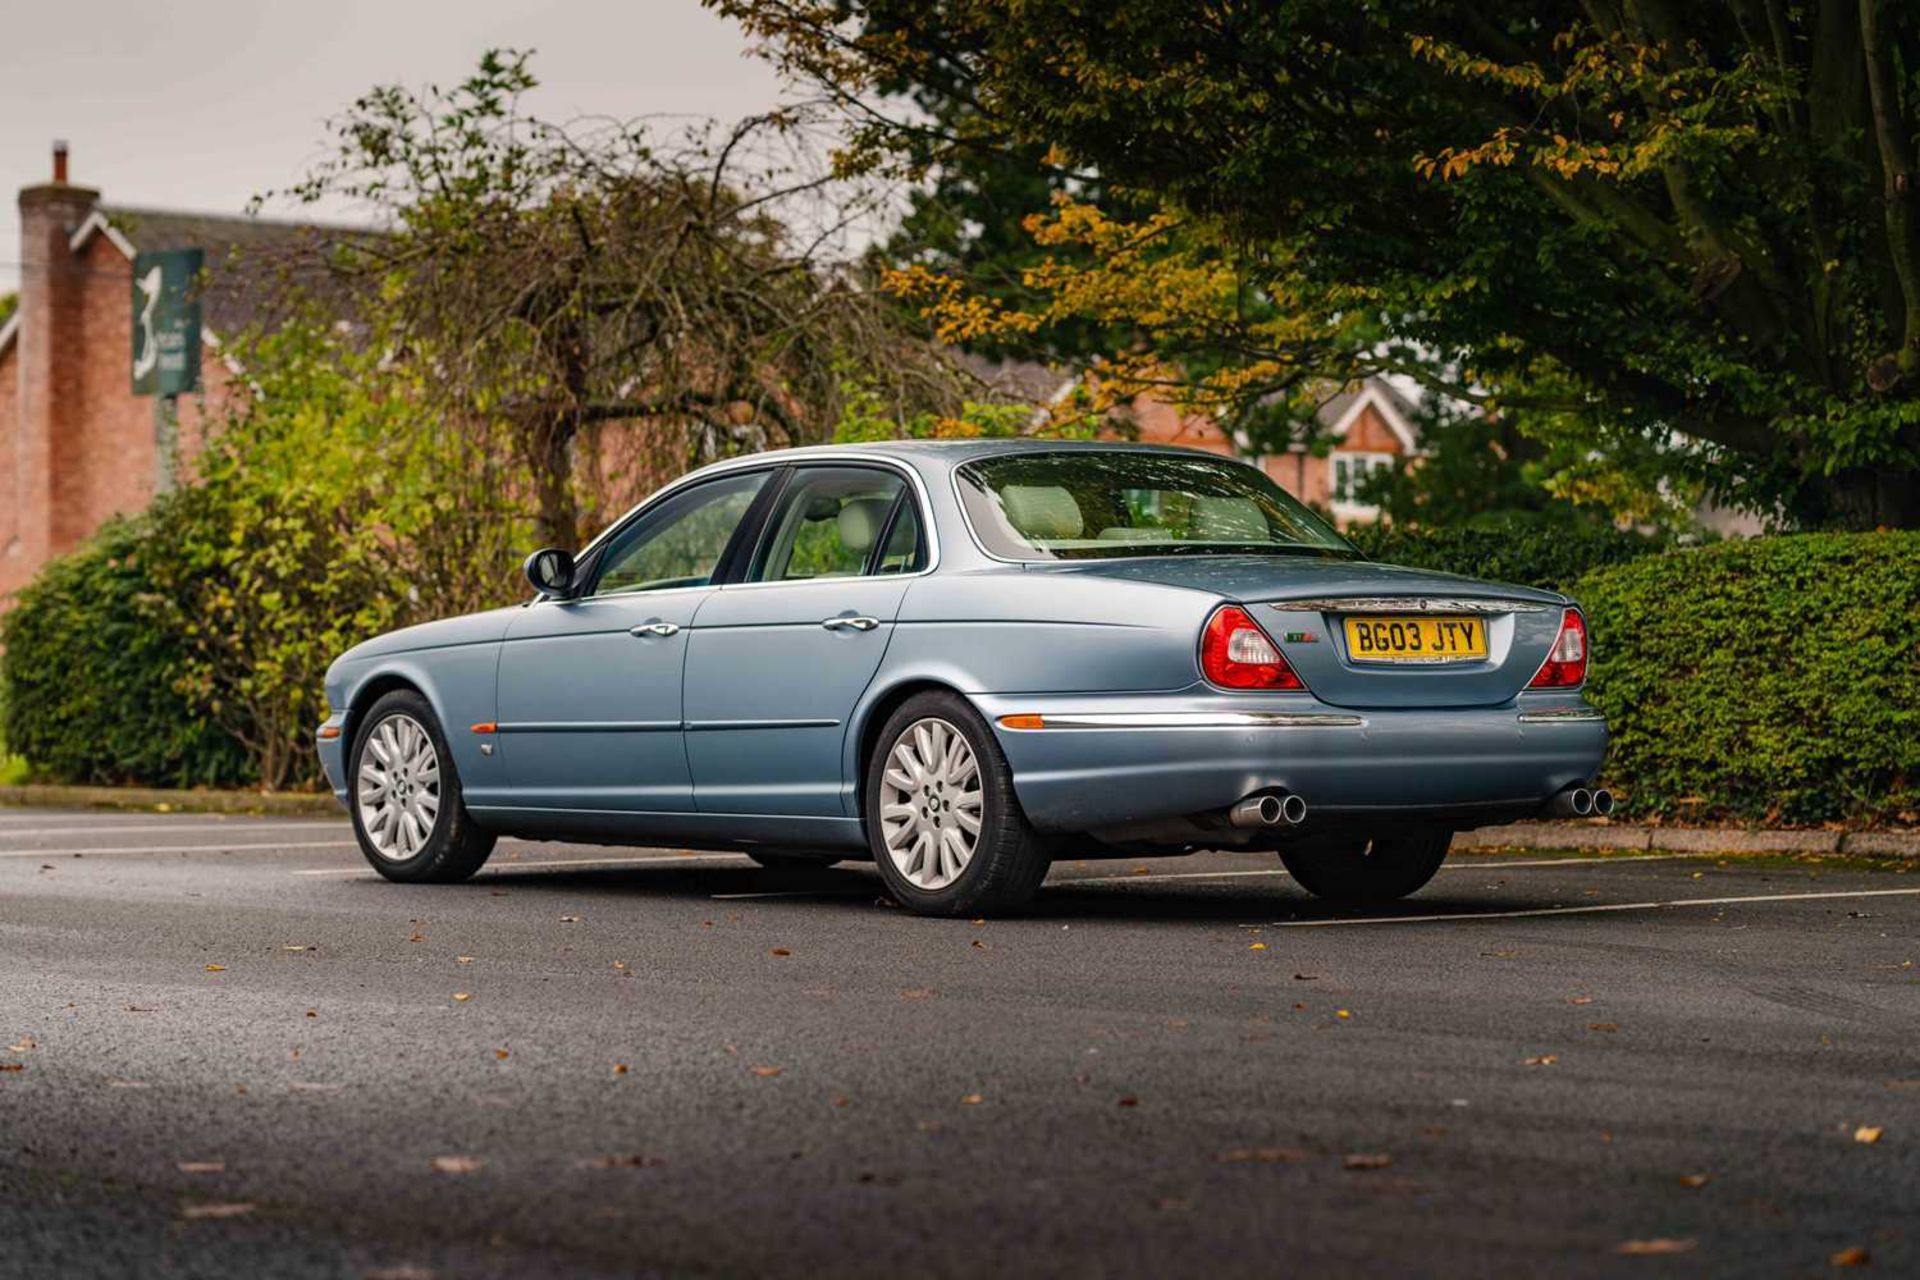 2003 Jaguar XJ8 4.2 V8 SE Range-topping 'Special Equipment' model, with a current MOT and warranted  - Image 7 of 63